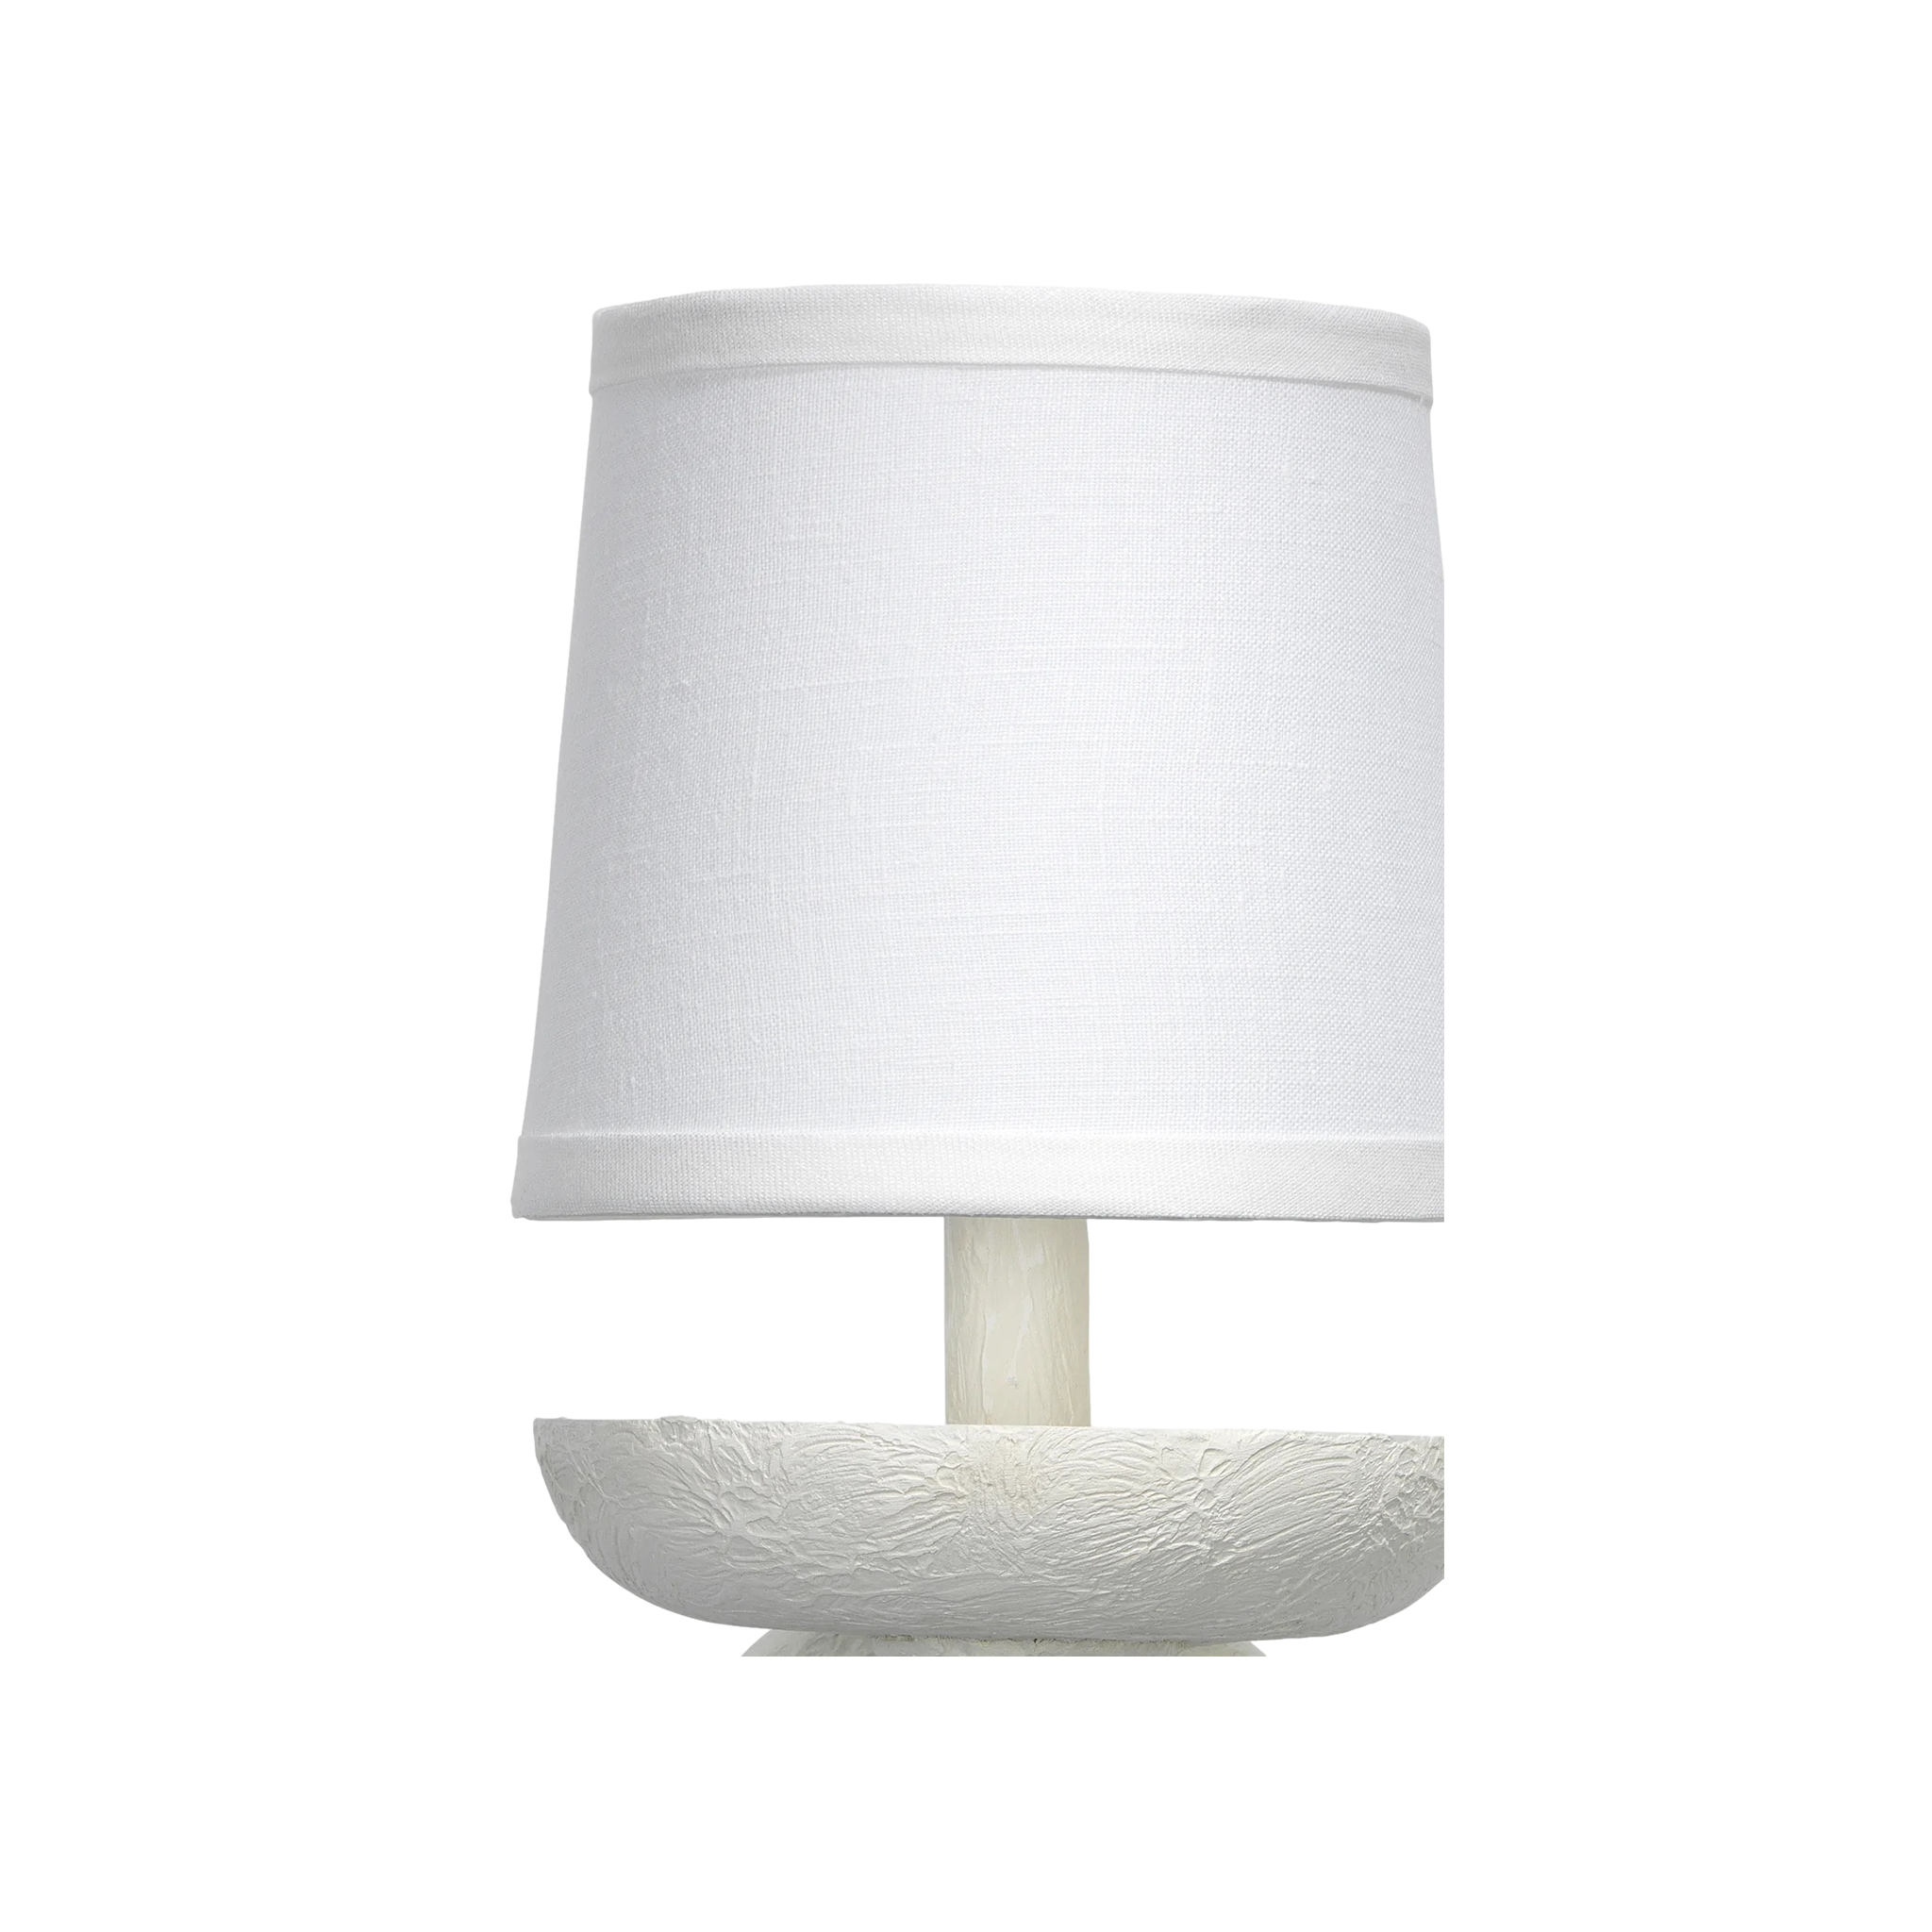 Concord Wall Sconce (White)